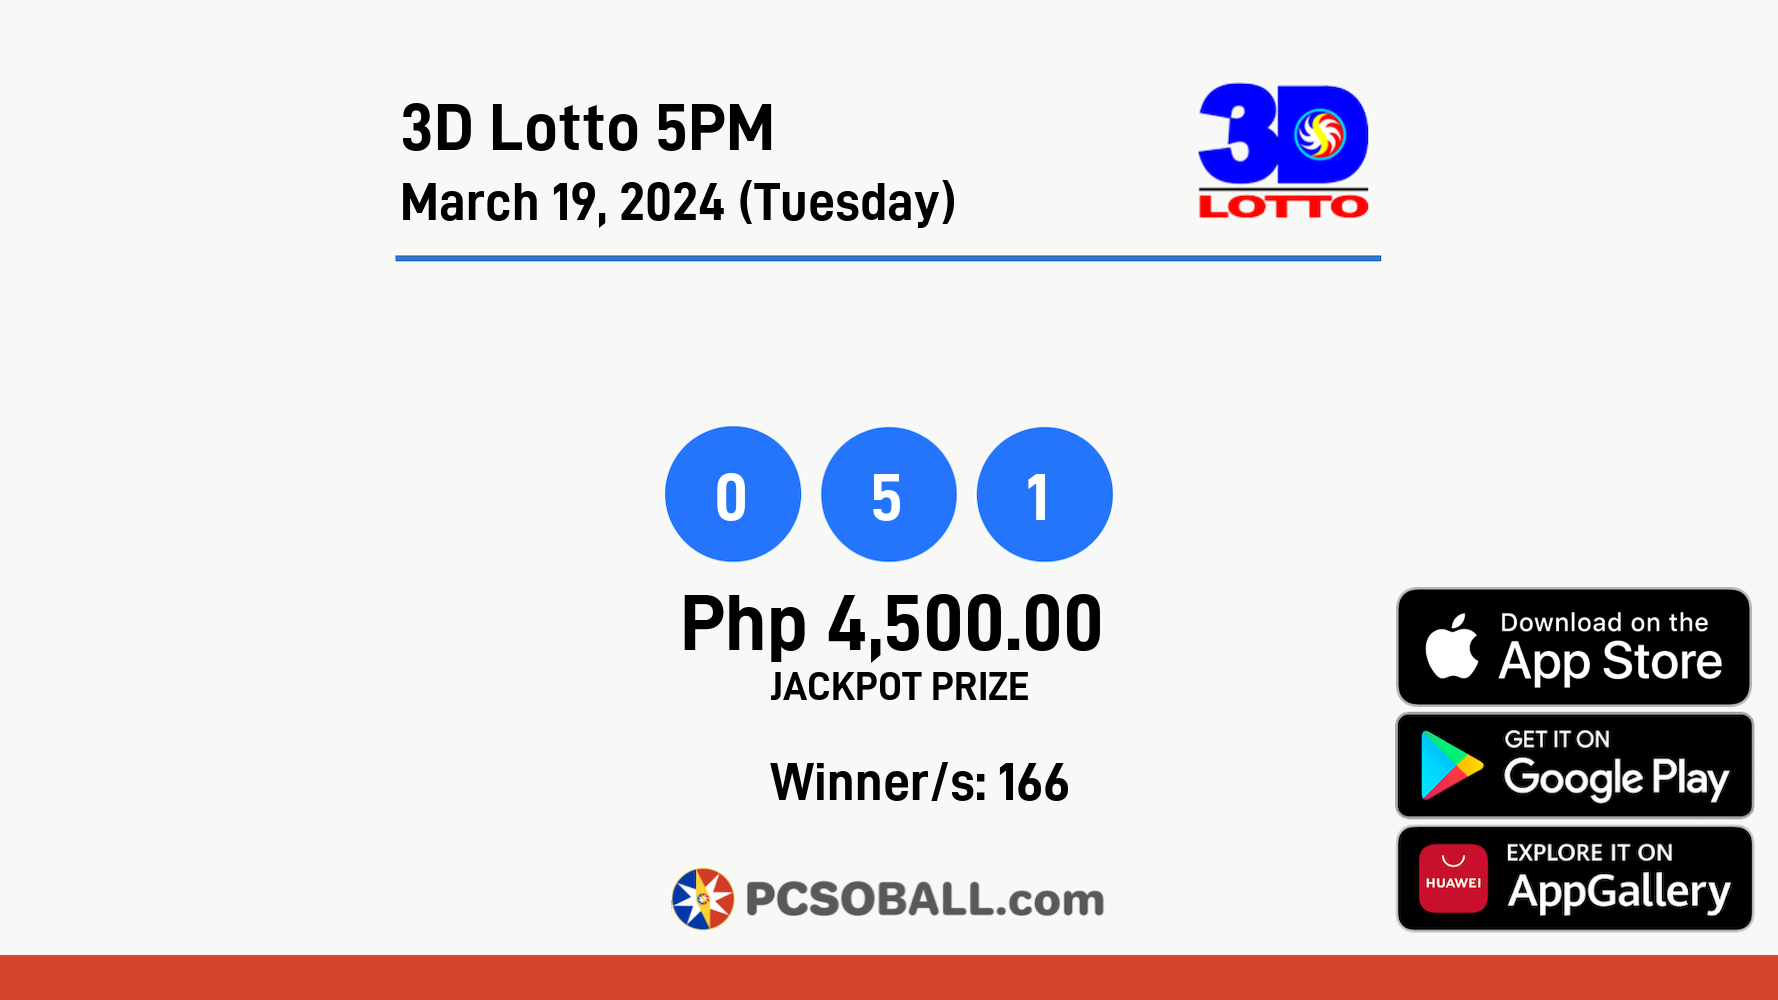 3D Lotto 5PM March 19, 2024 (Tuesday) Result